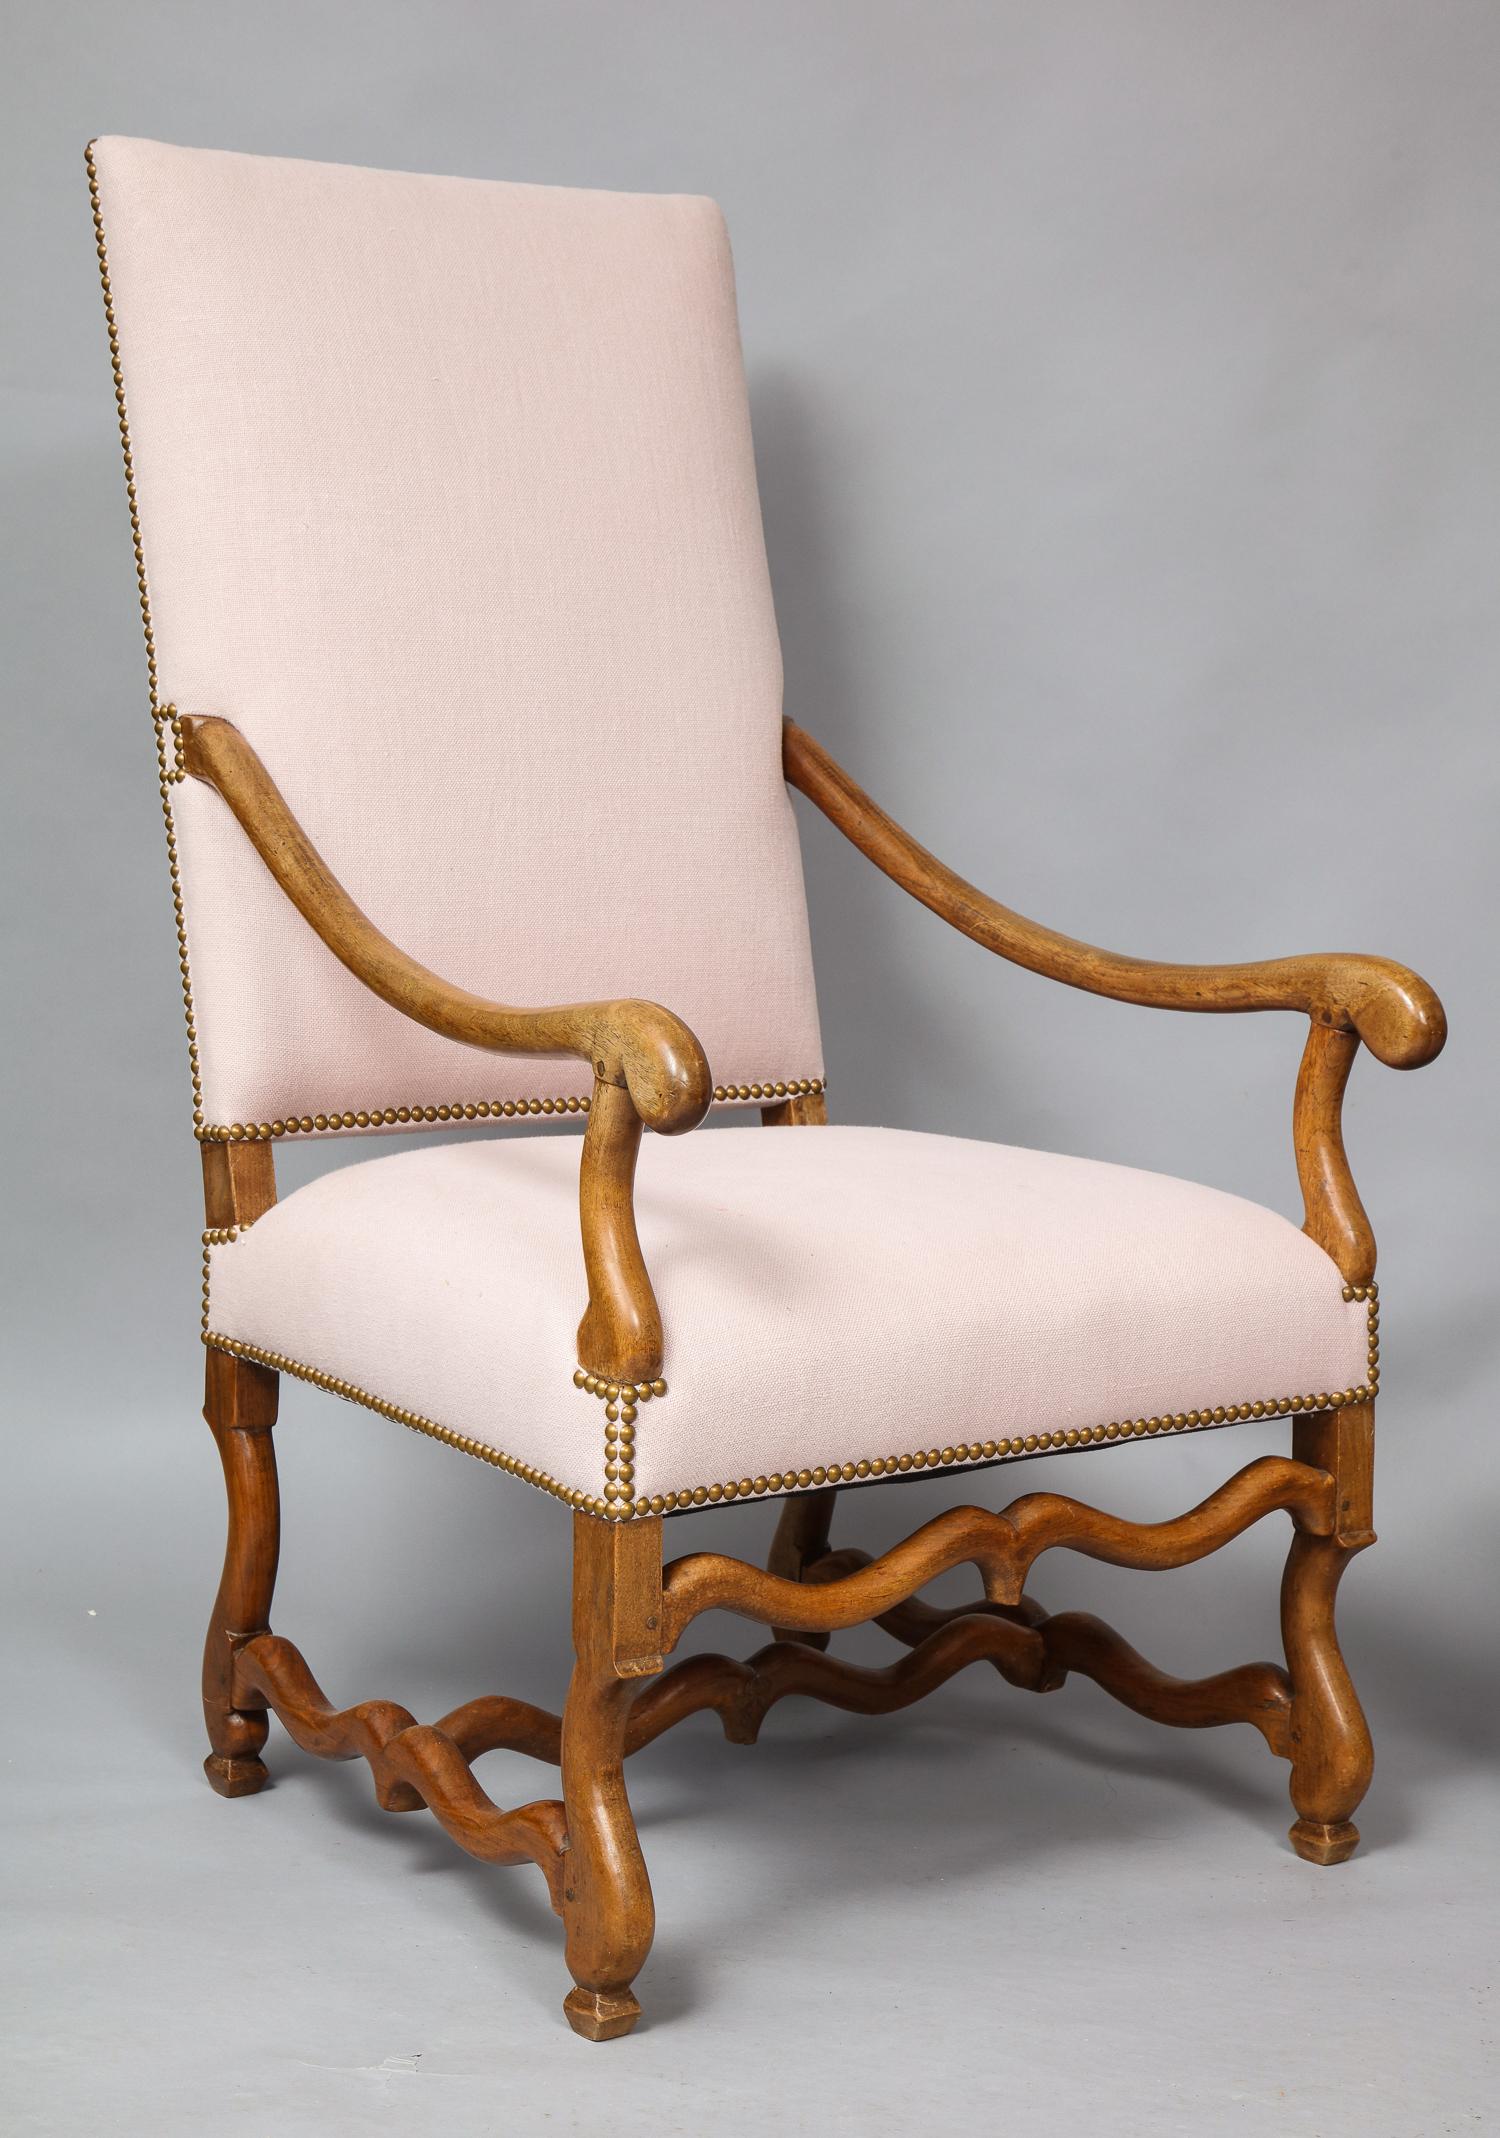 Good pair of French or Flemish walnut Baroque armchairs, having upholstered high squared backs and seats with brass stud detailing now recovered in fresh linen, with downswept arms ending in rolled handles, the legs and stretchers with 